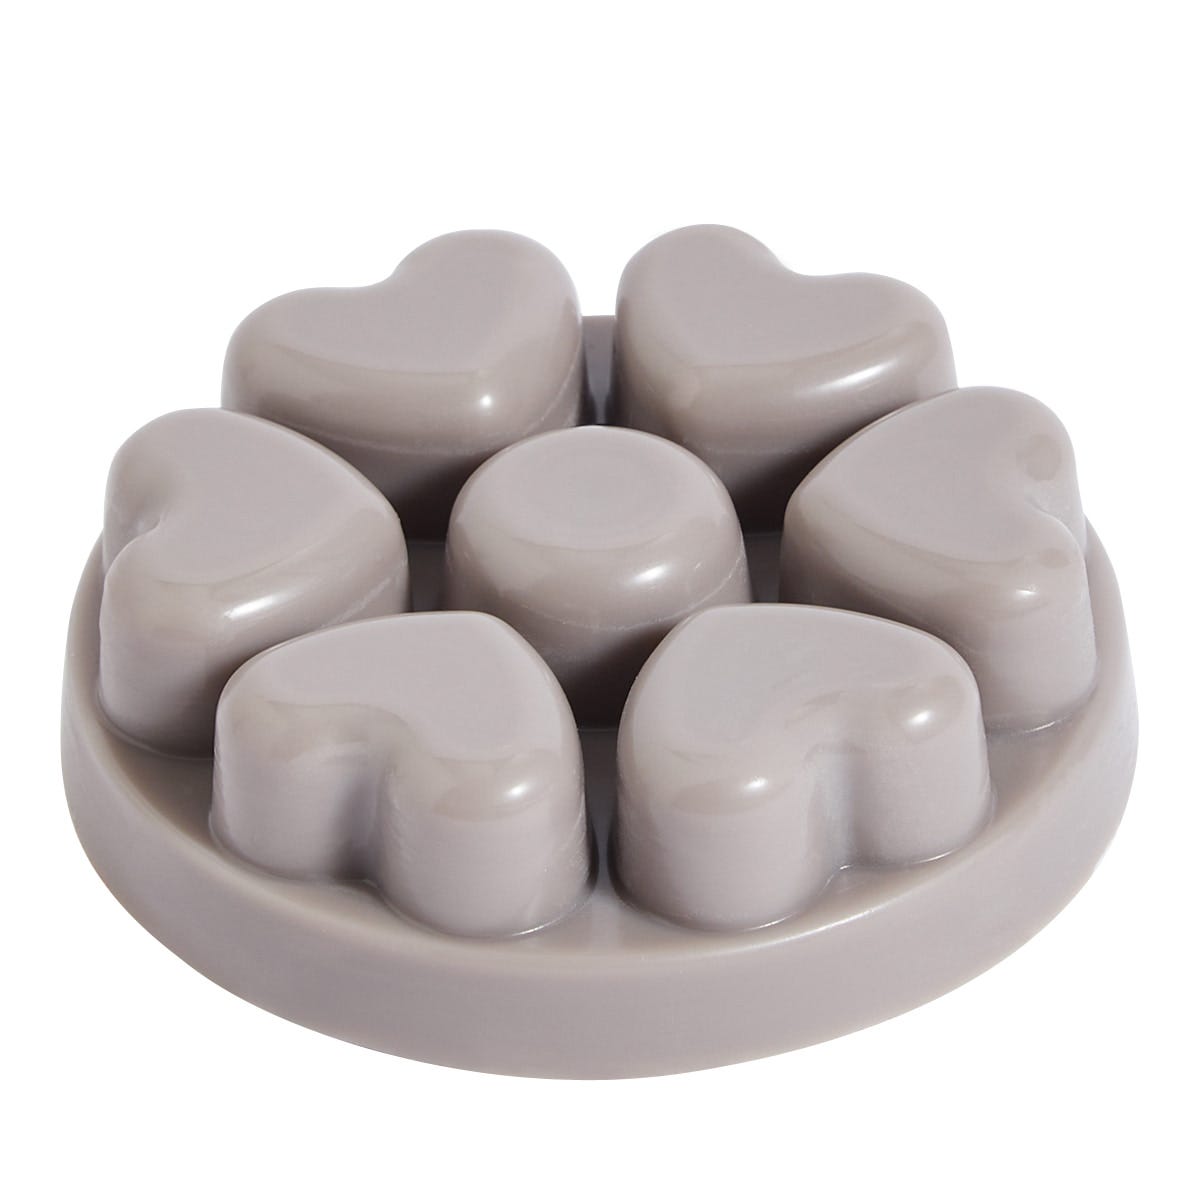 Winter Warmth Scent Plus Wax Melts